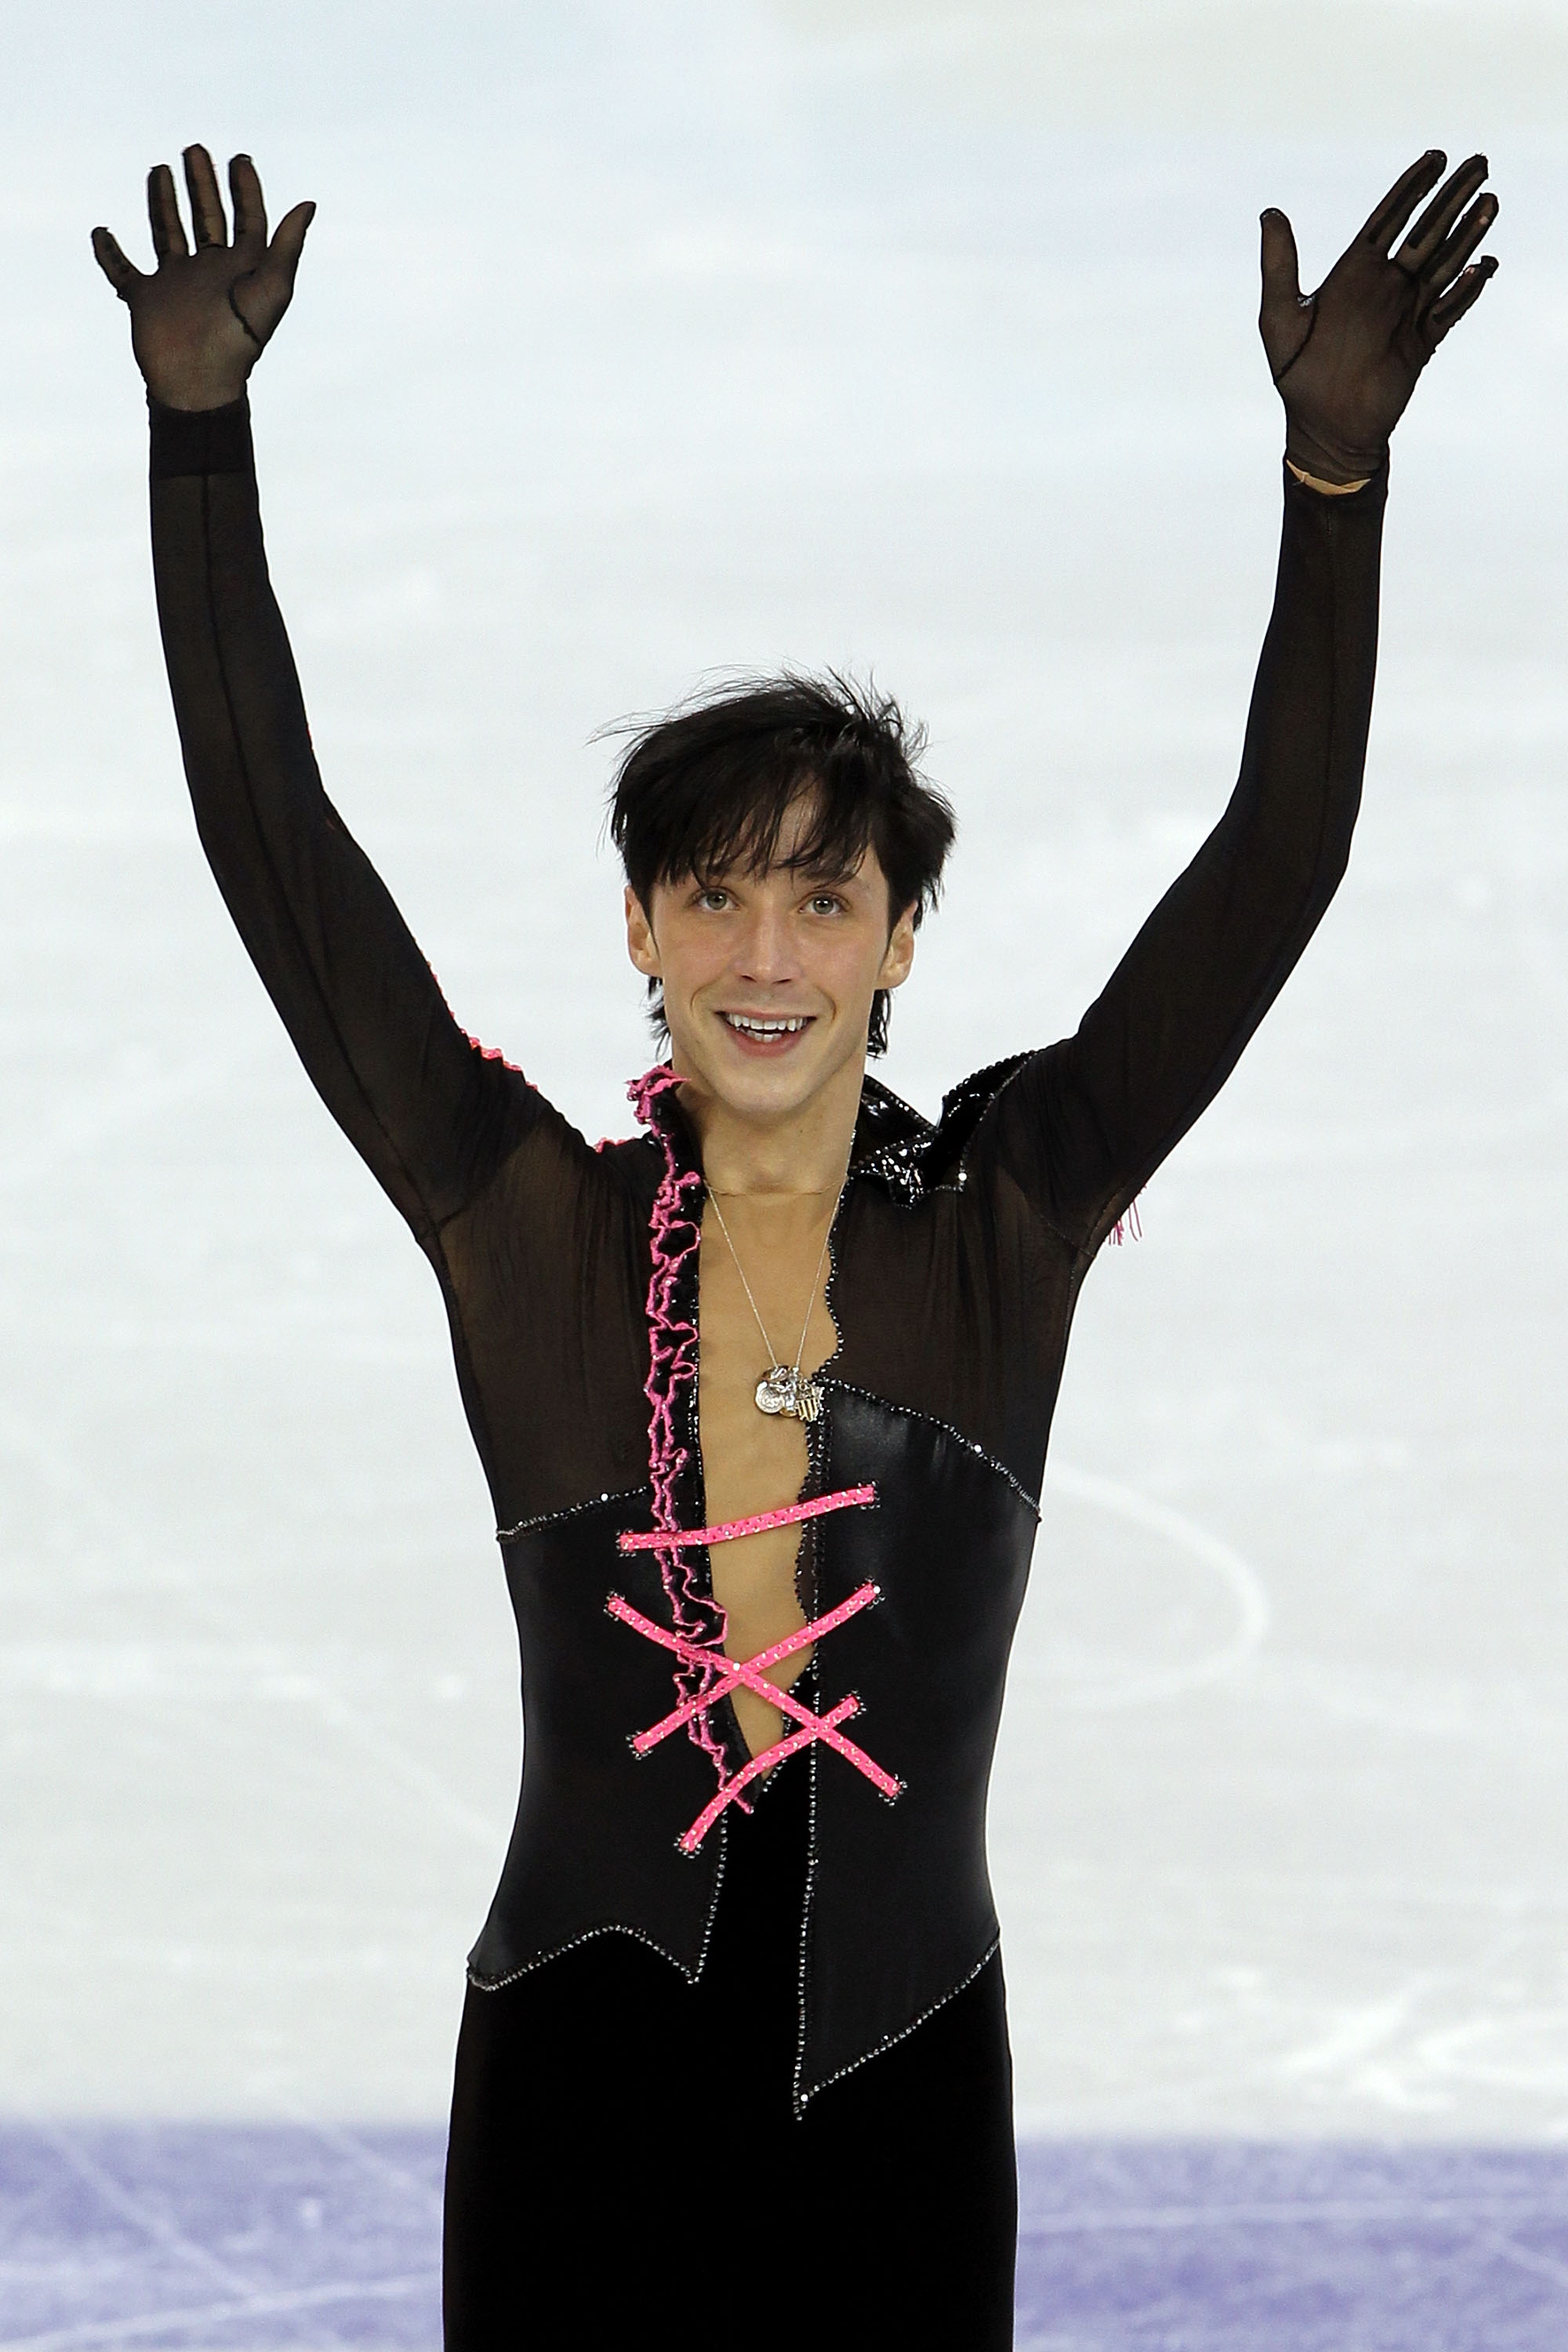 VANCOUVER, BC - FEBRUARY 16:  Johnny Weir of the United States reacts after his routine in the men's figure skating short program on day 5 of the Vancouver 2010 Winter Olympics at the Pacific Coliseum on February 16, 2010 in Vancouver, Canada.  (Photo by